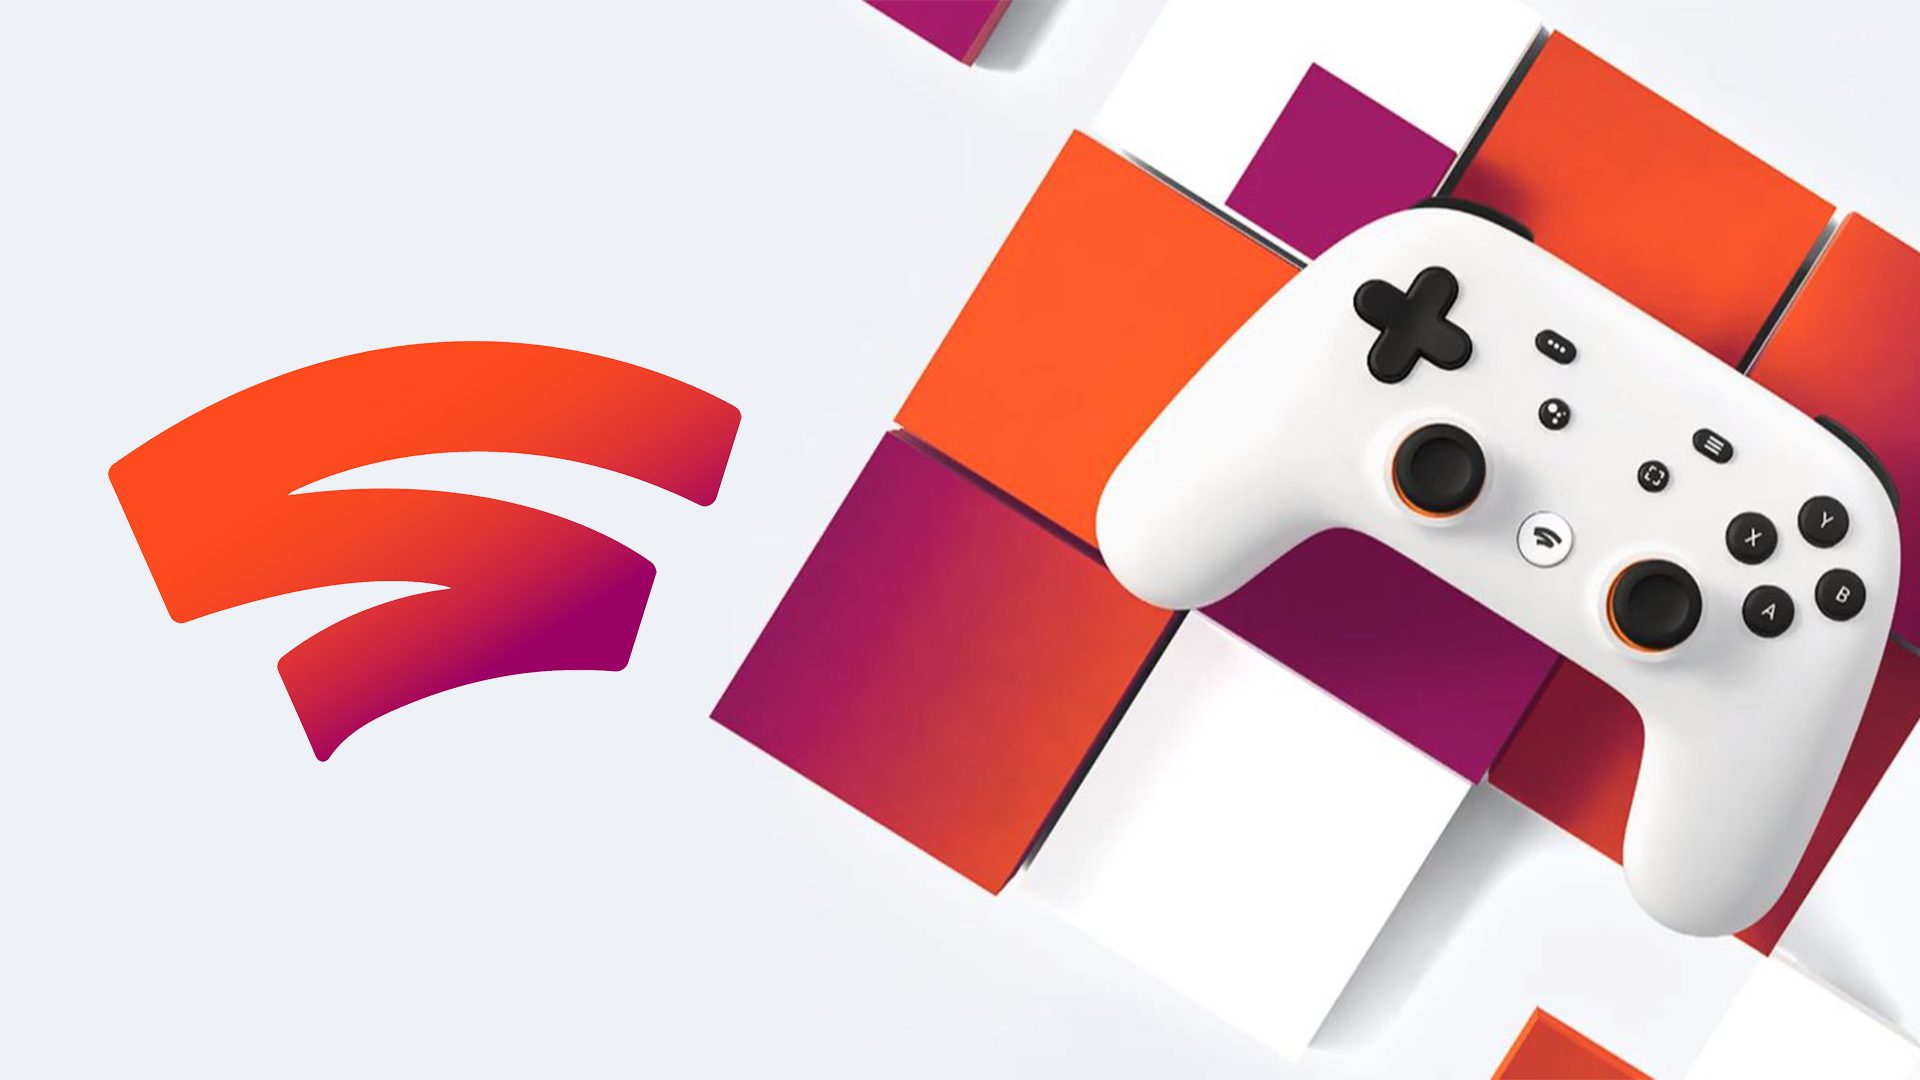 What Does Google Stadia Need to Be Successful?